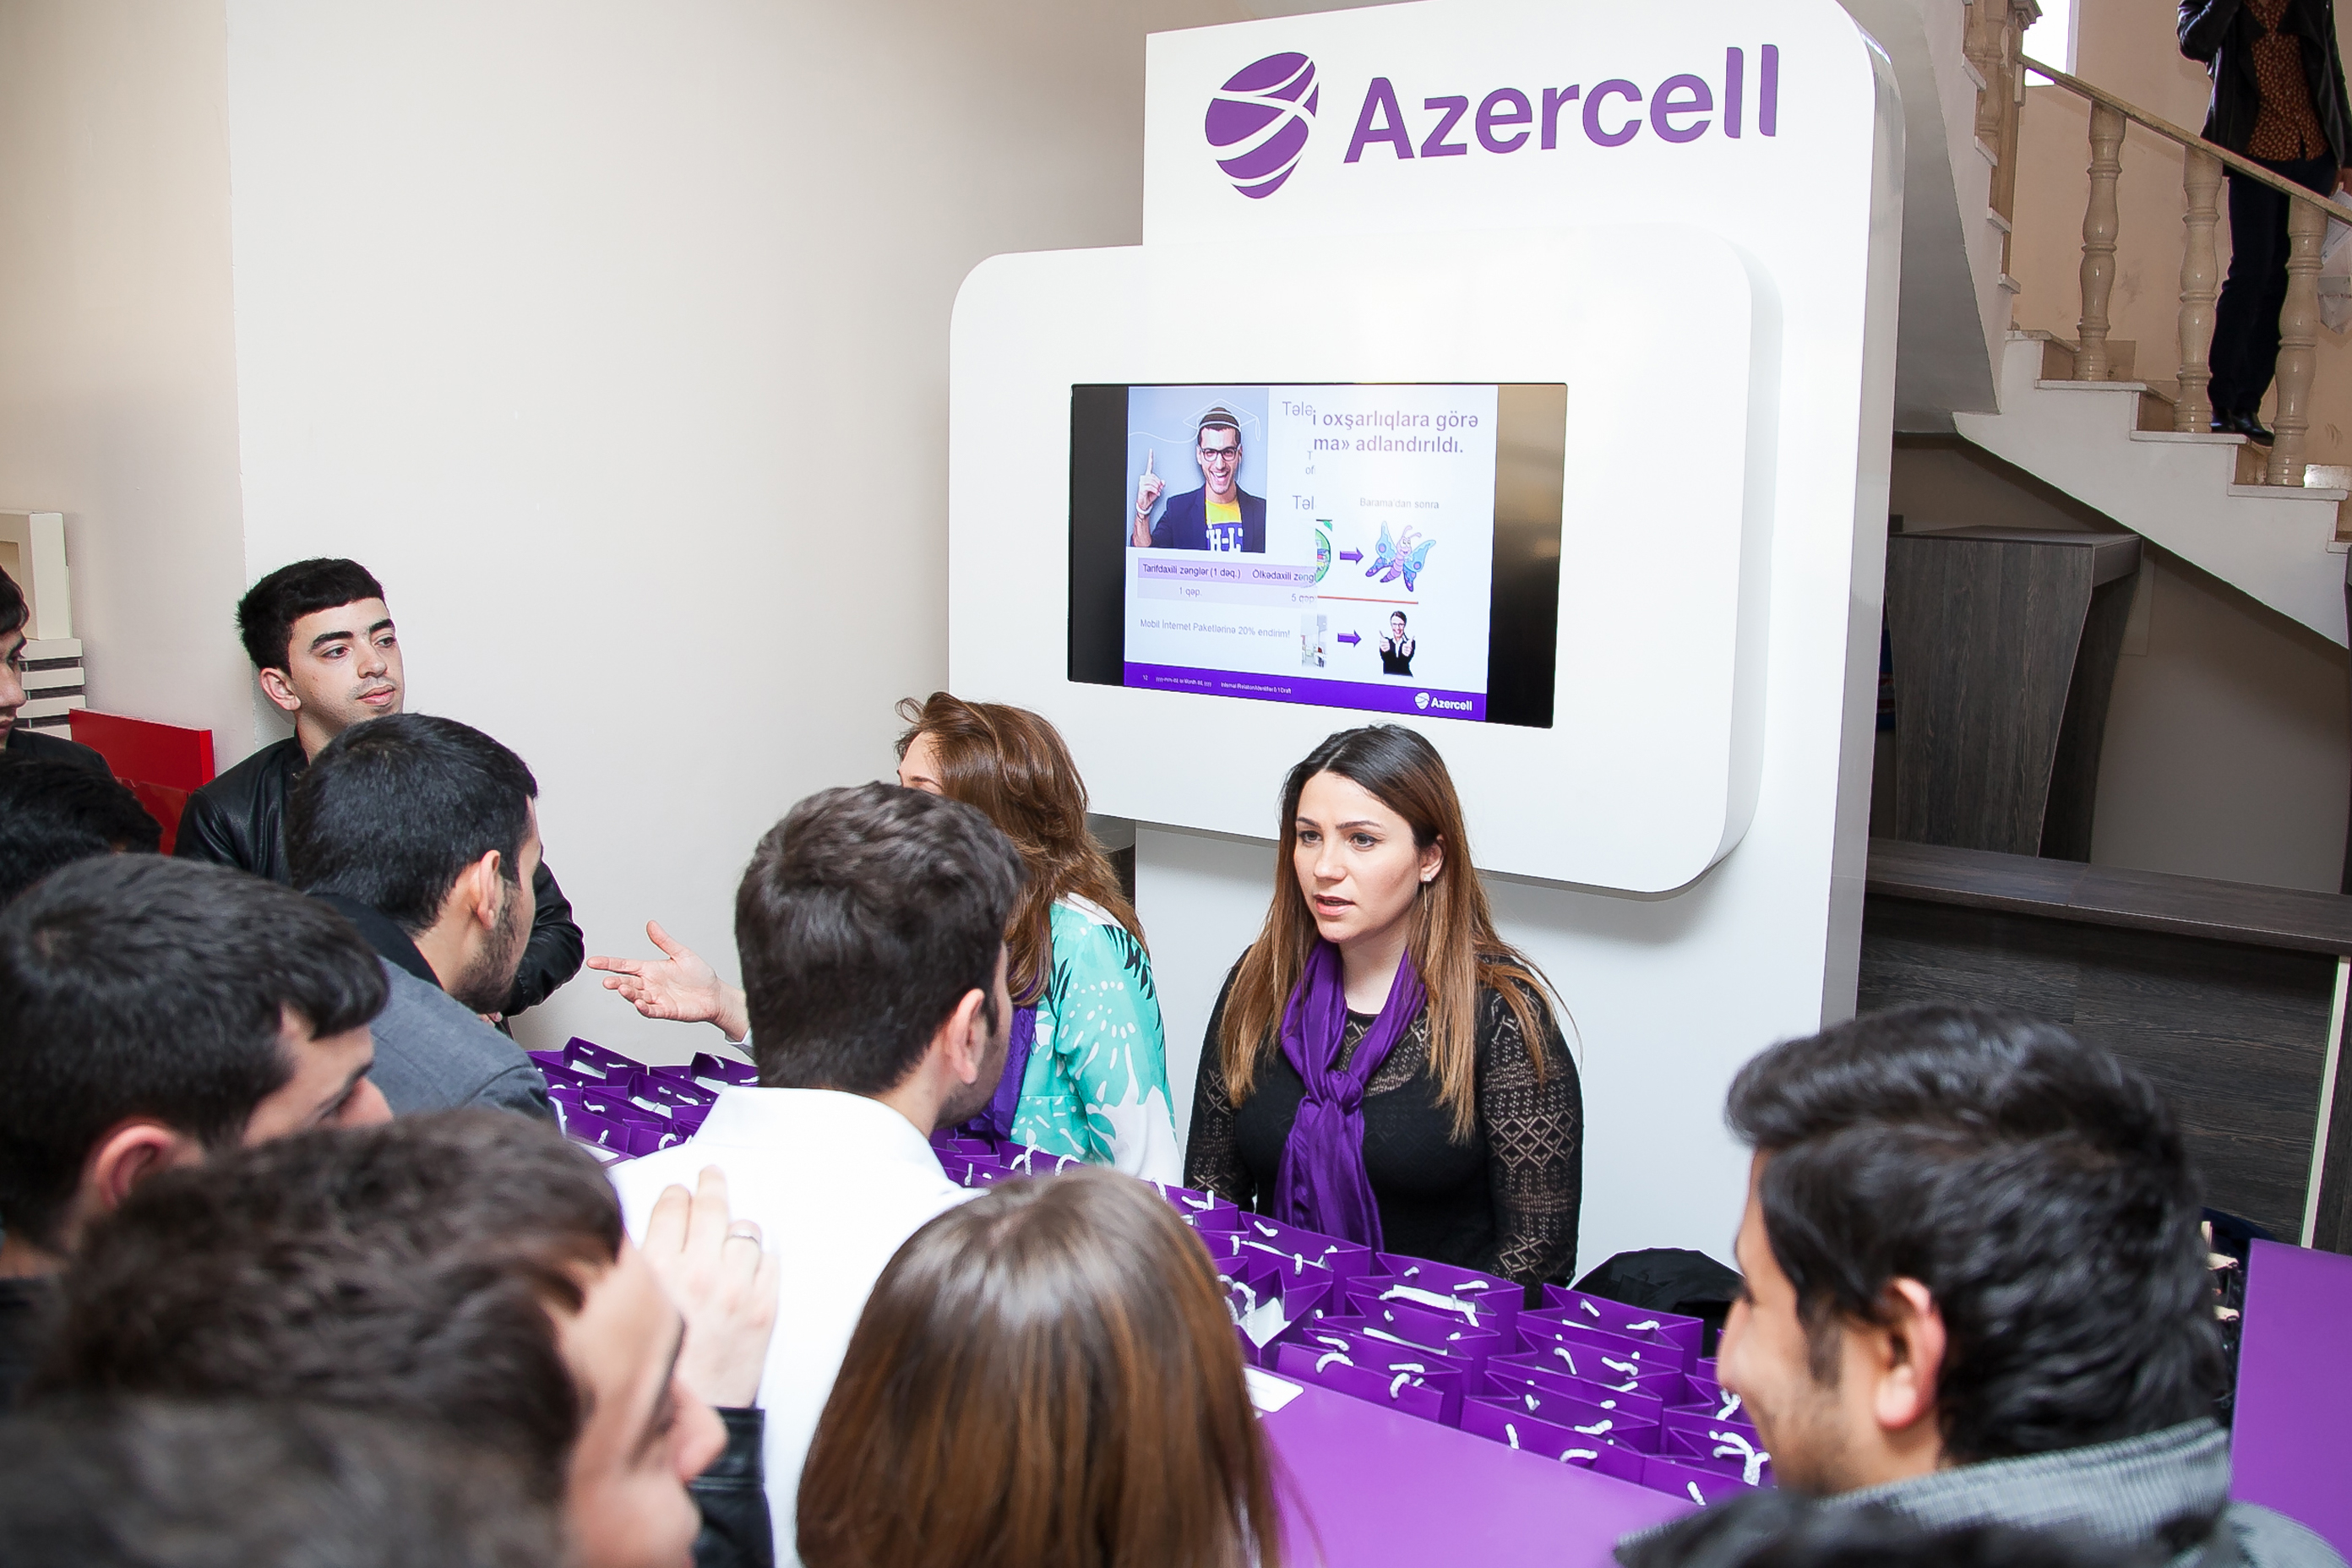 Azercell continues supporting students